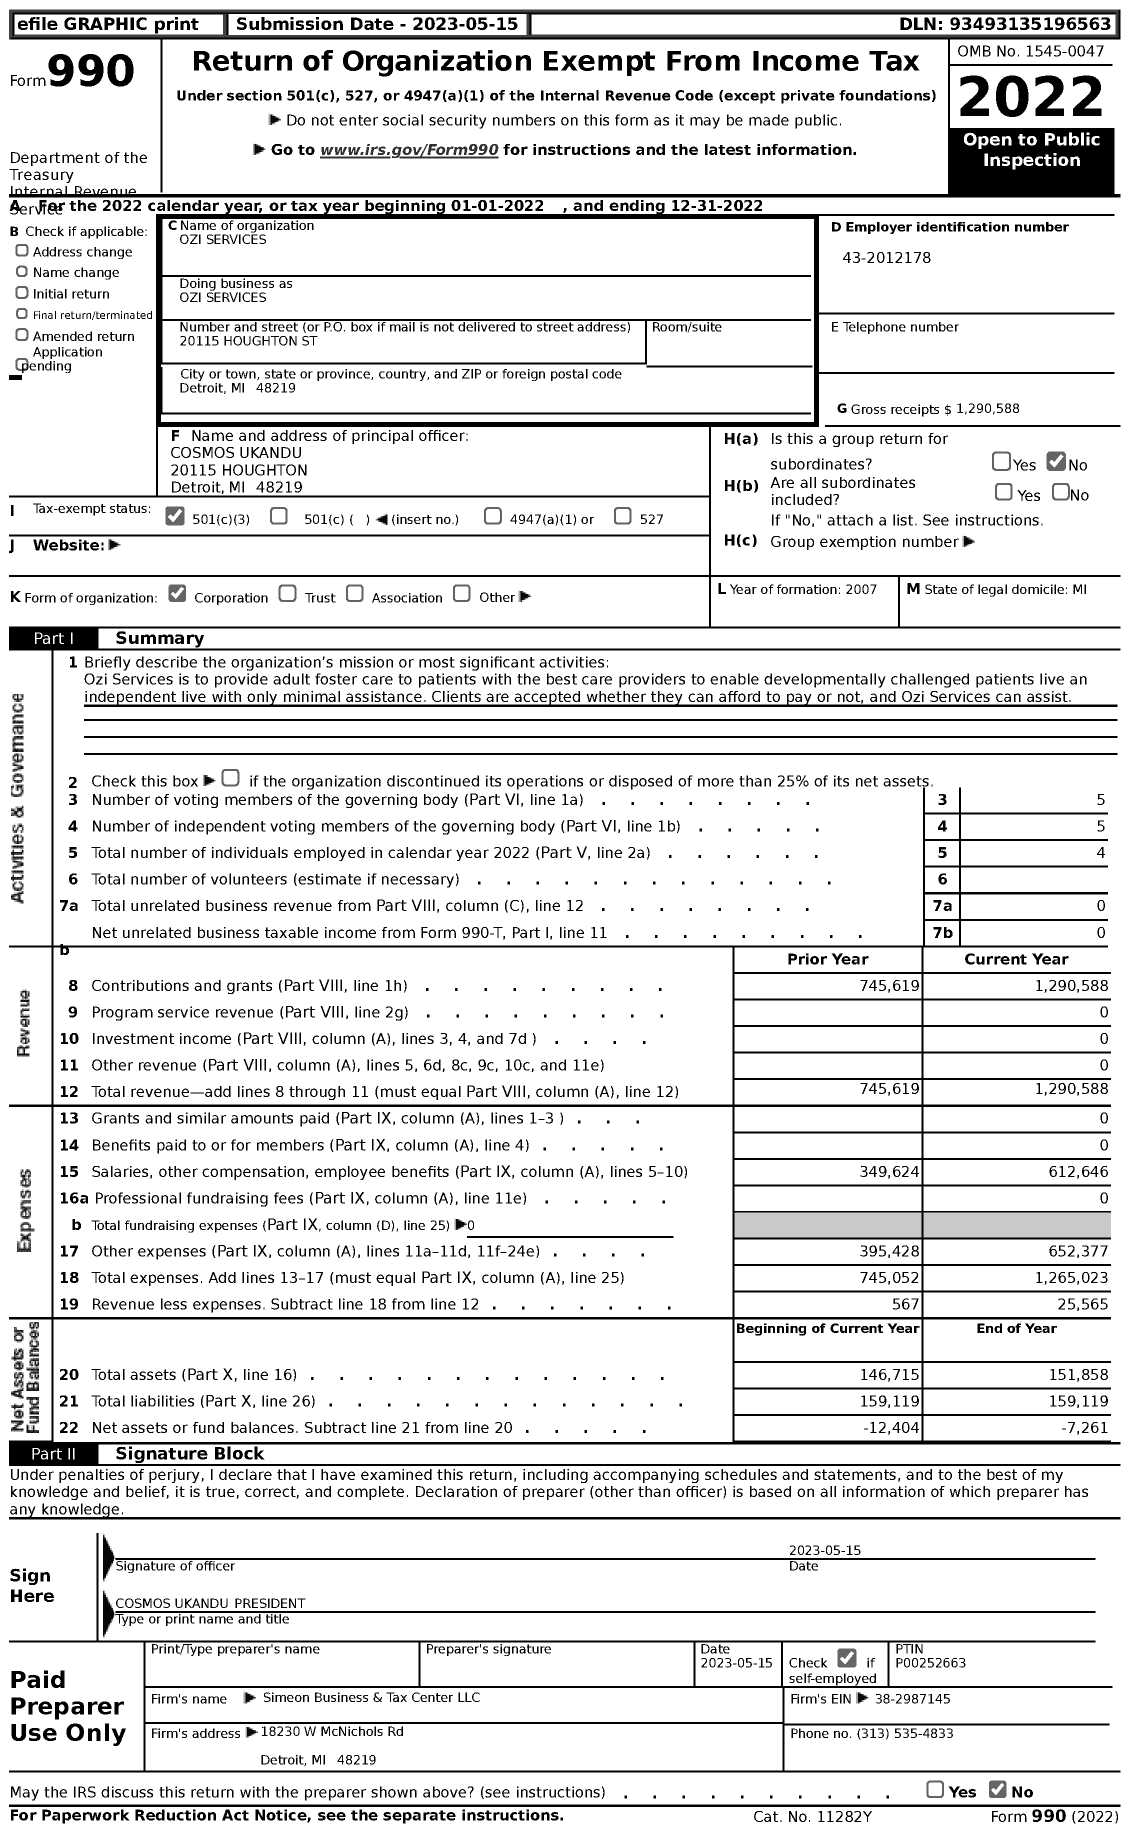 Image of first page of 2022 Form 990 for Ozi Services (OSI)